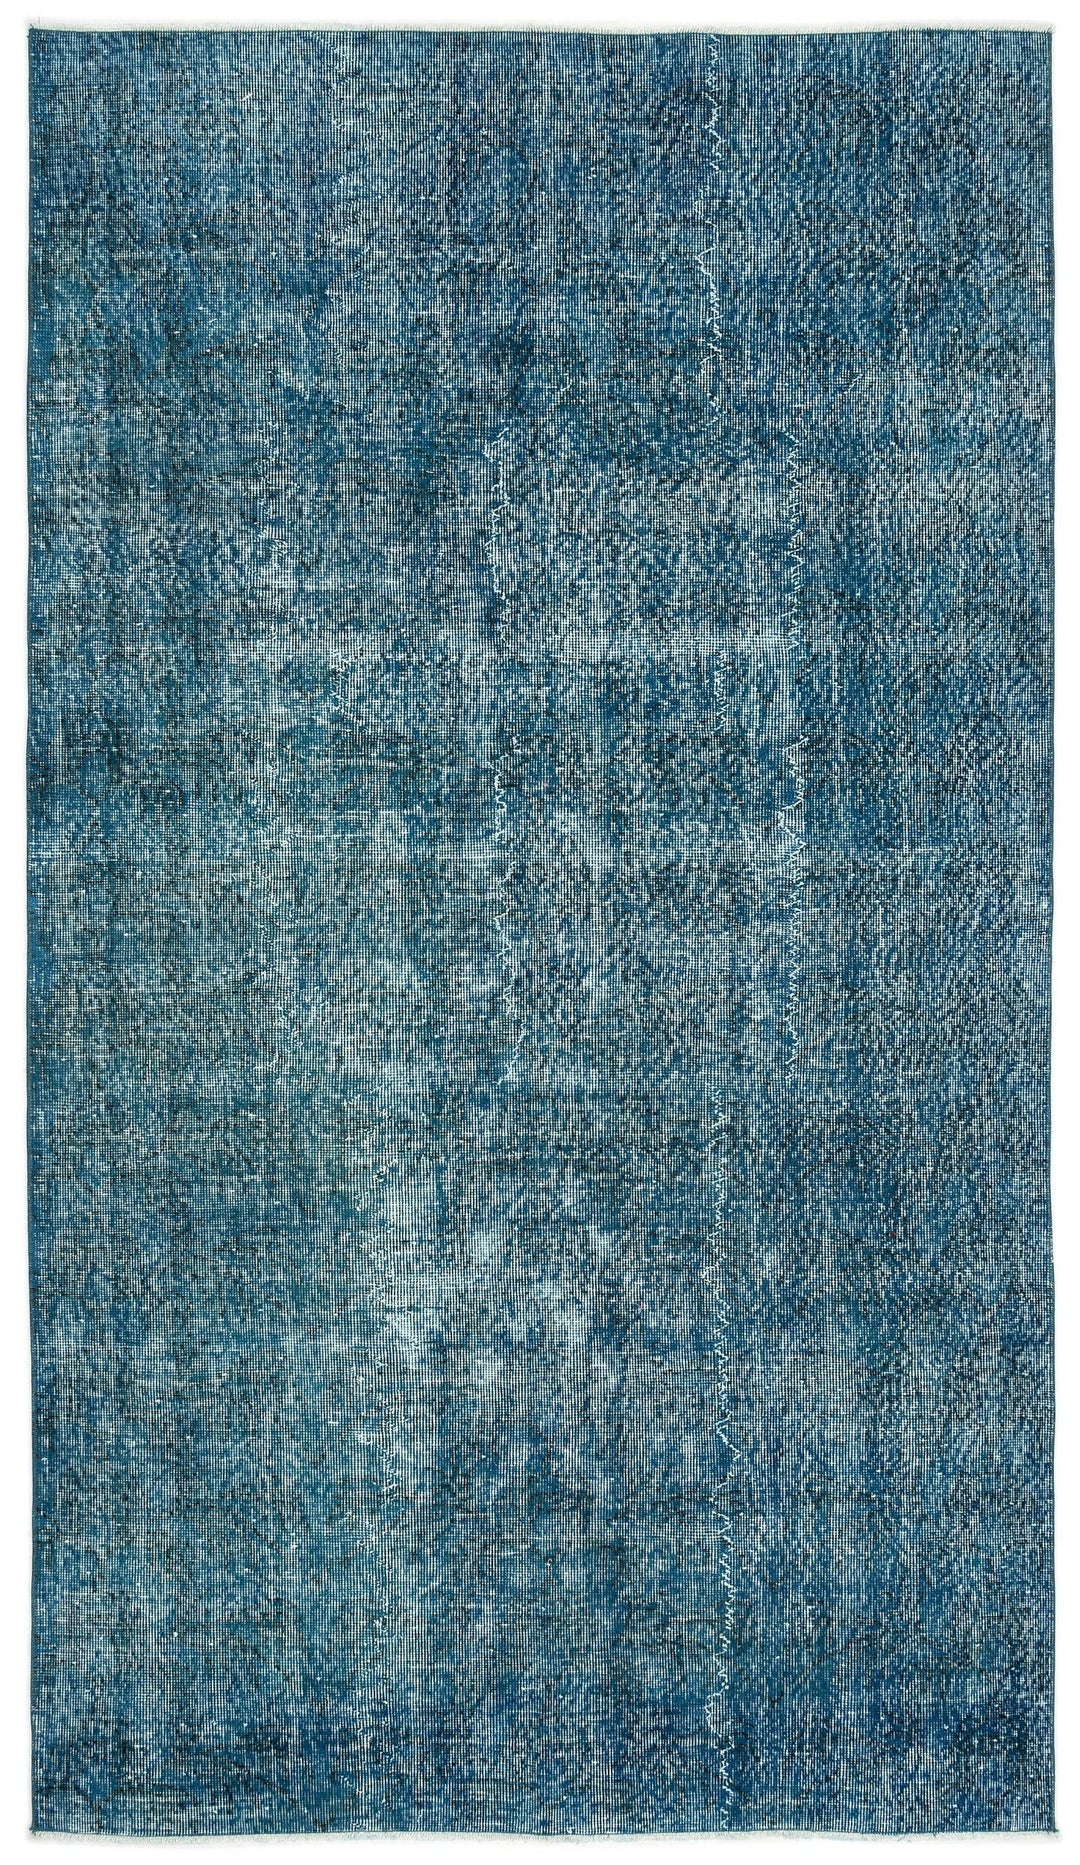 Athens Turquoise Tumbled Wool Hand Woven Carpet 148 x 264